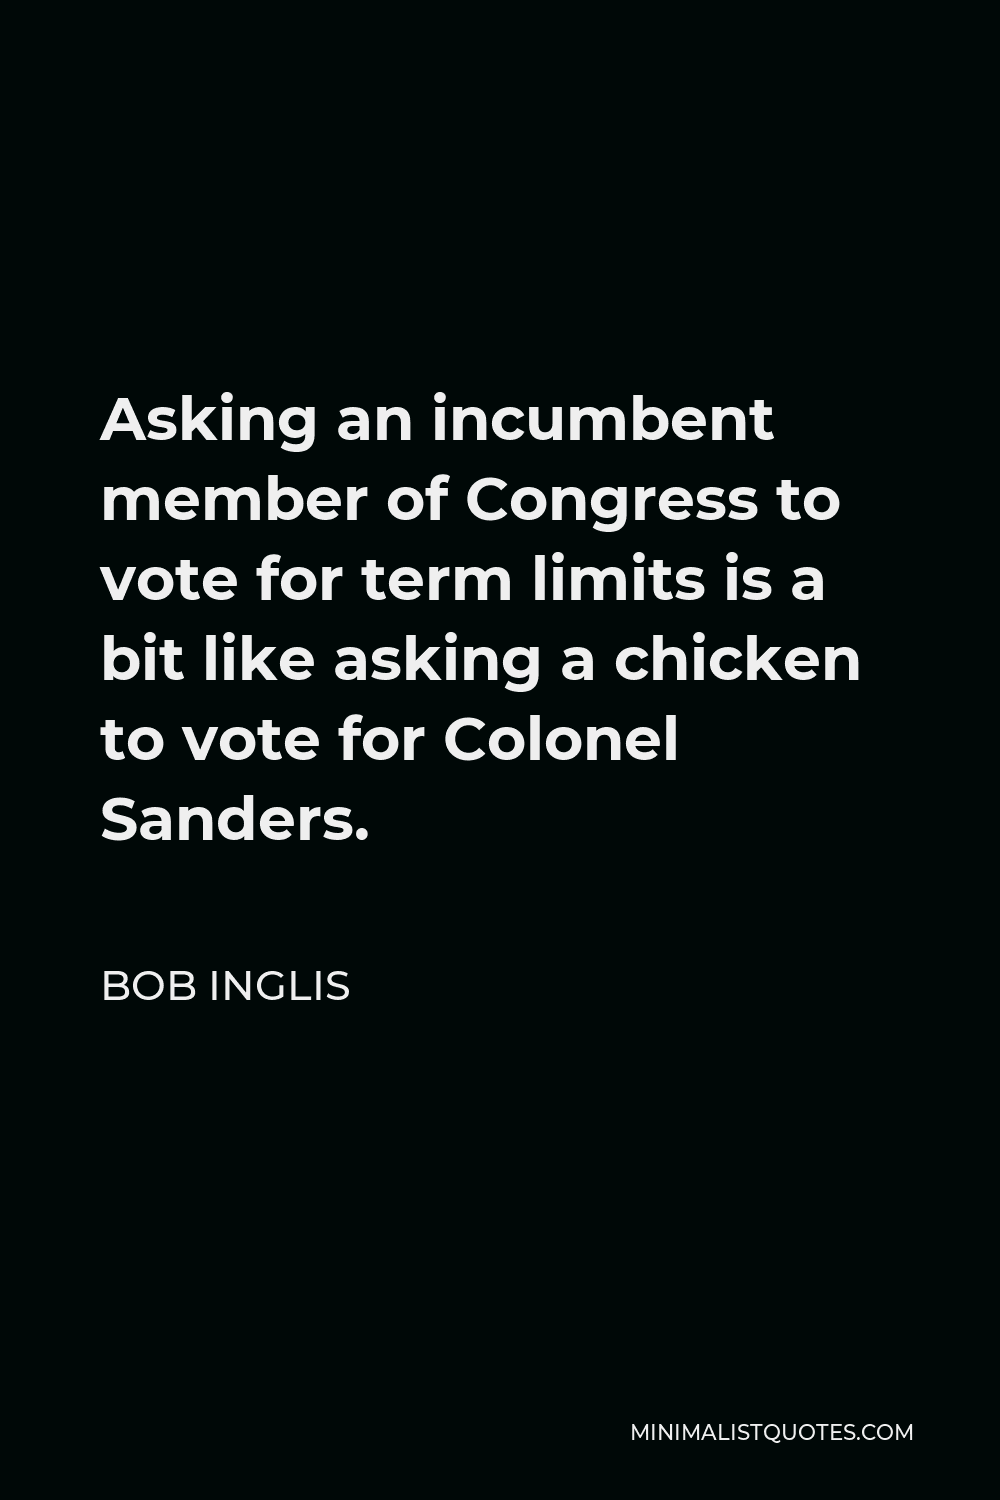 Bob Inglis Quote - Asking an incumbent member of Congress to vote for term limits is a bit like asking a chicken to vote for Colonel Sanders.